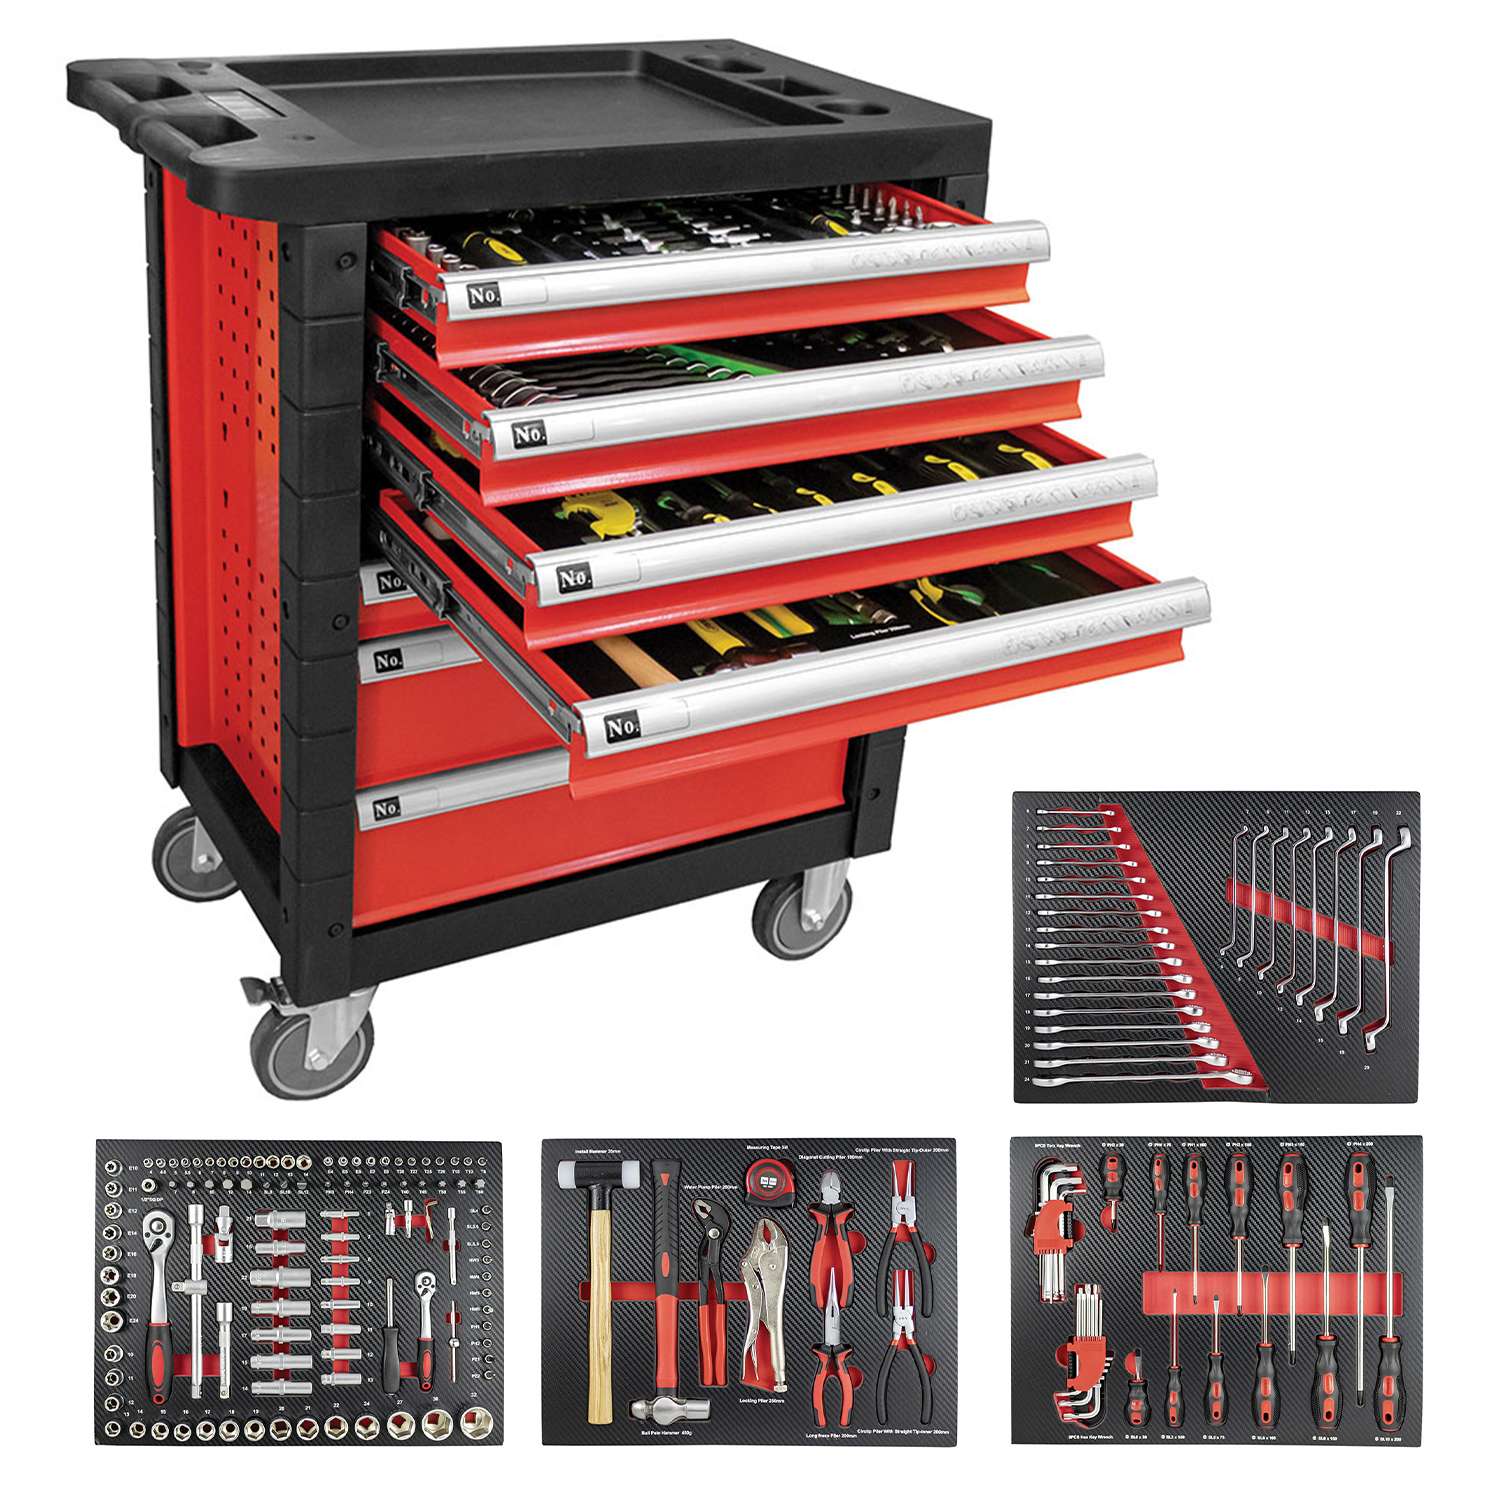 Red tool cart with 7 drawers complete with 172 tools - Fermec FM53686